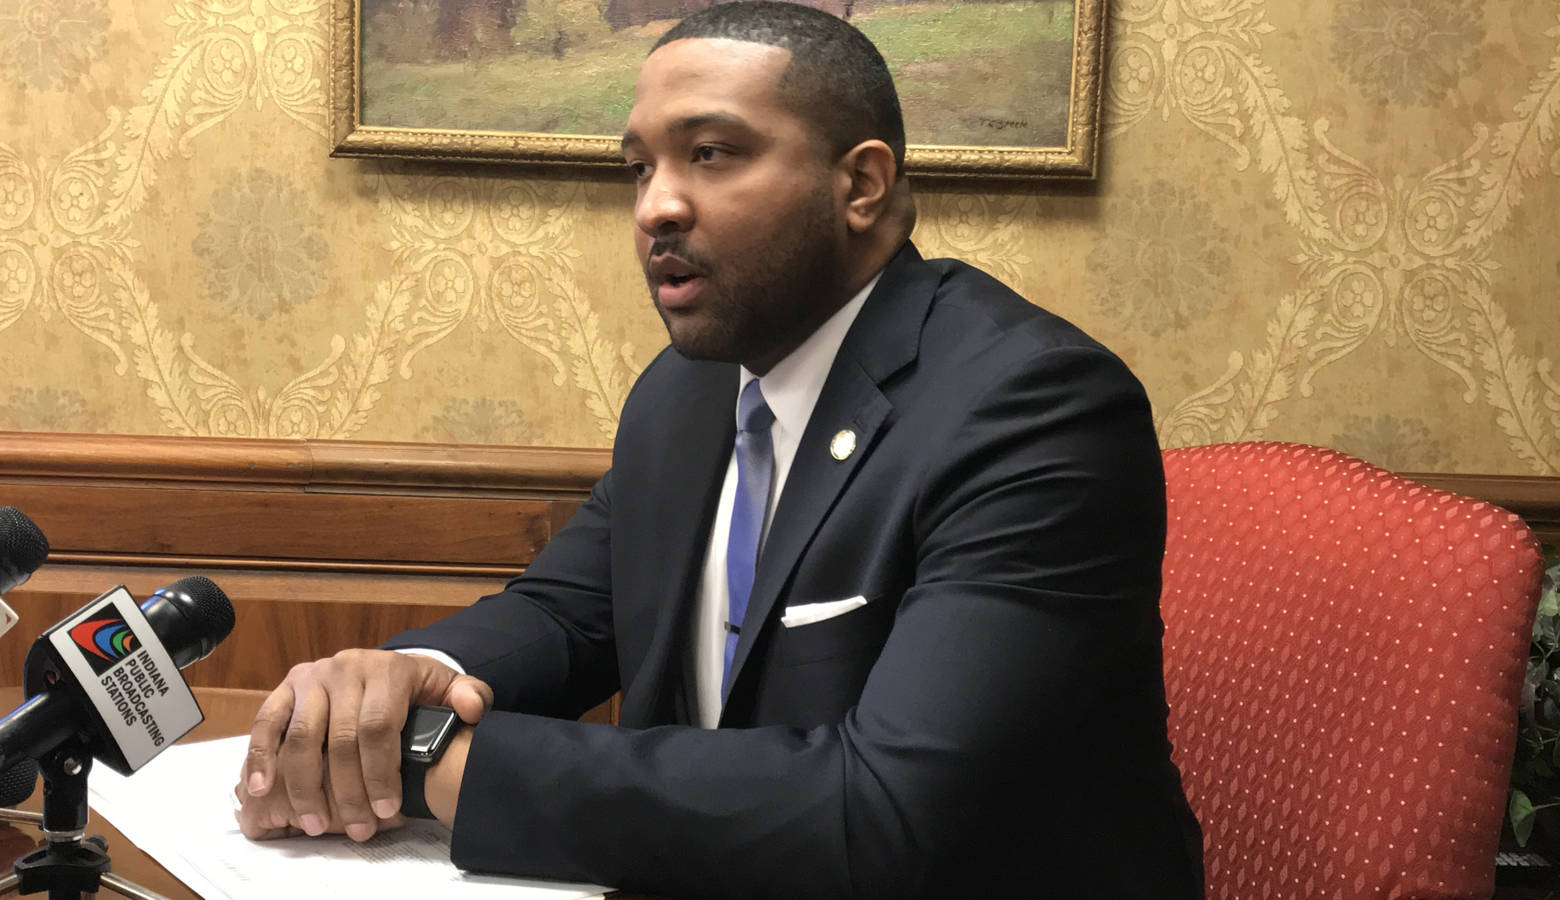 Sen. Eddie Melton (D-Merrillville) says his proposed two-year commission is not meant to interfere with an ongoing, independent review of the Department of Child Services. (Brandon Smith/IPB News)